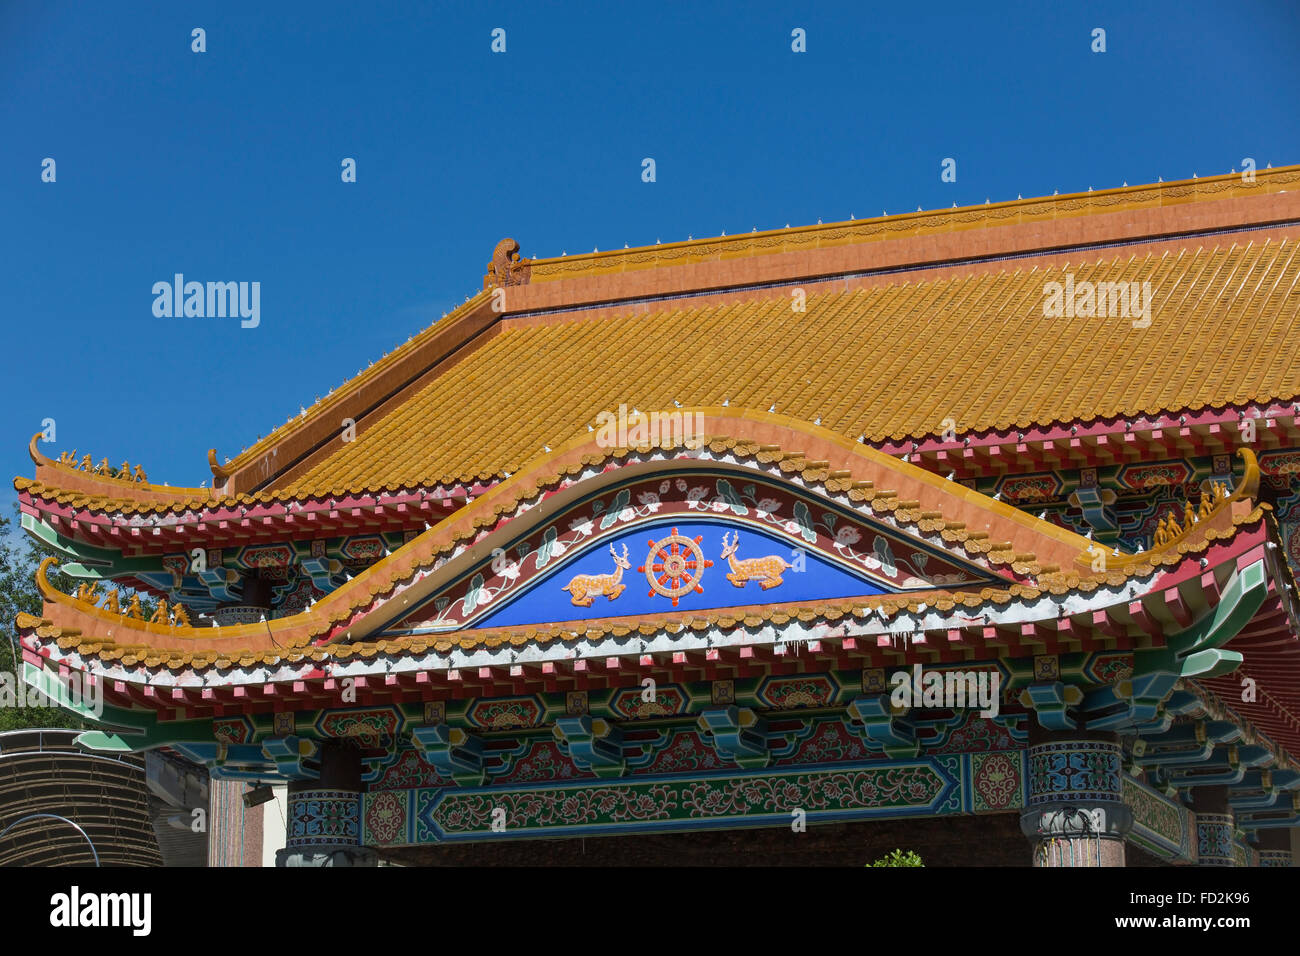 Colourful red tiled roof. Chinese temple roof lined with light bulbs with blue facia decorated with religious symbol. Stock Photo